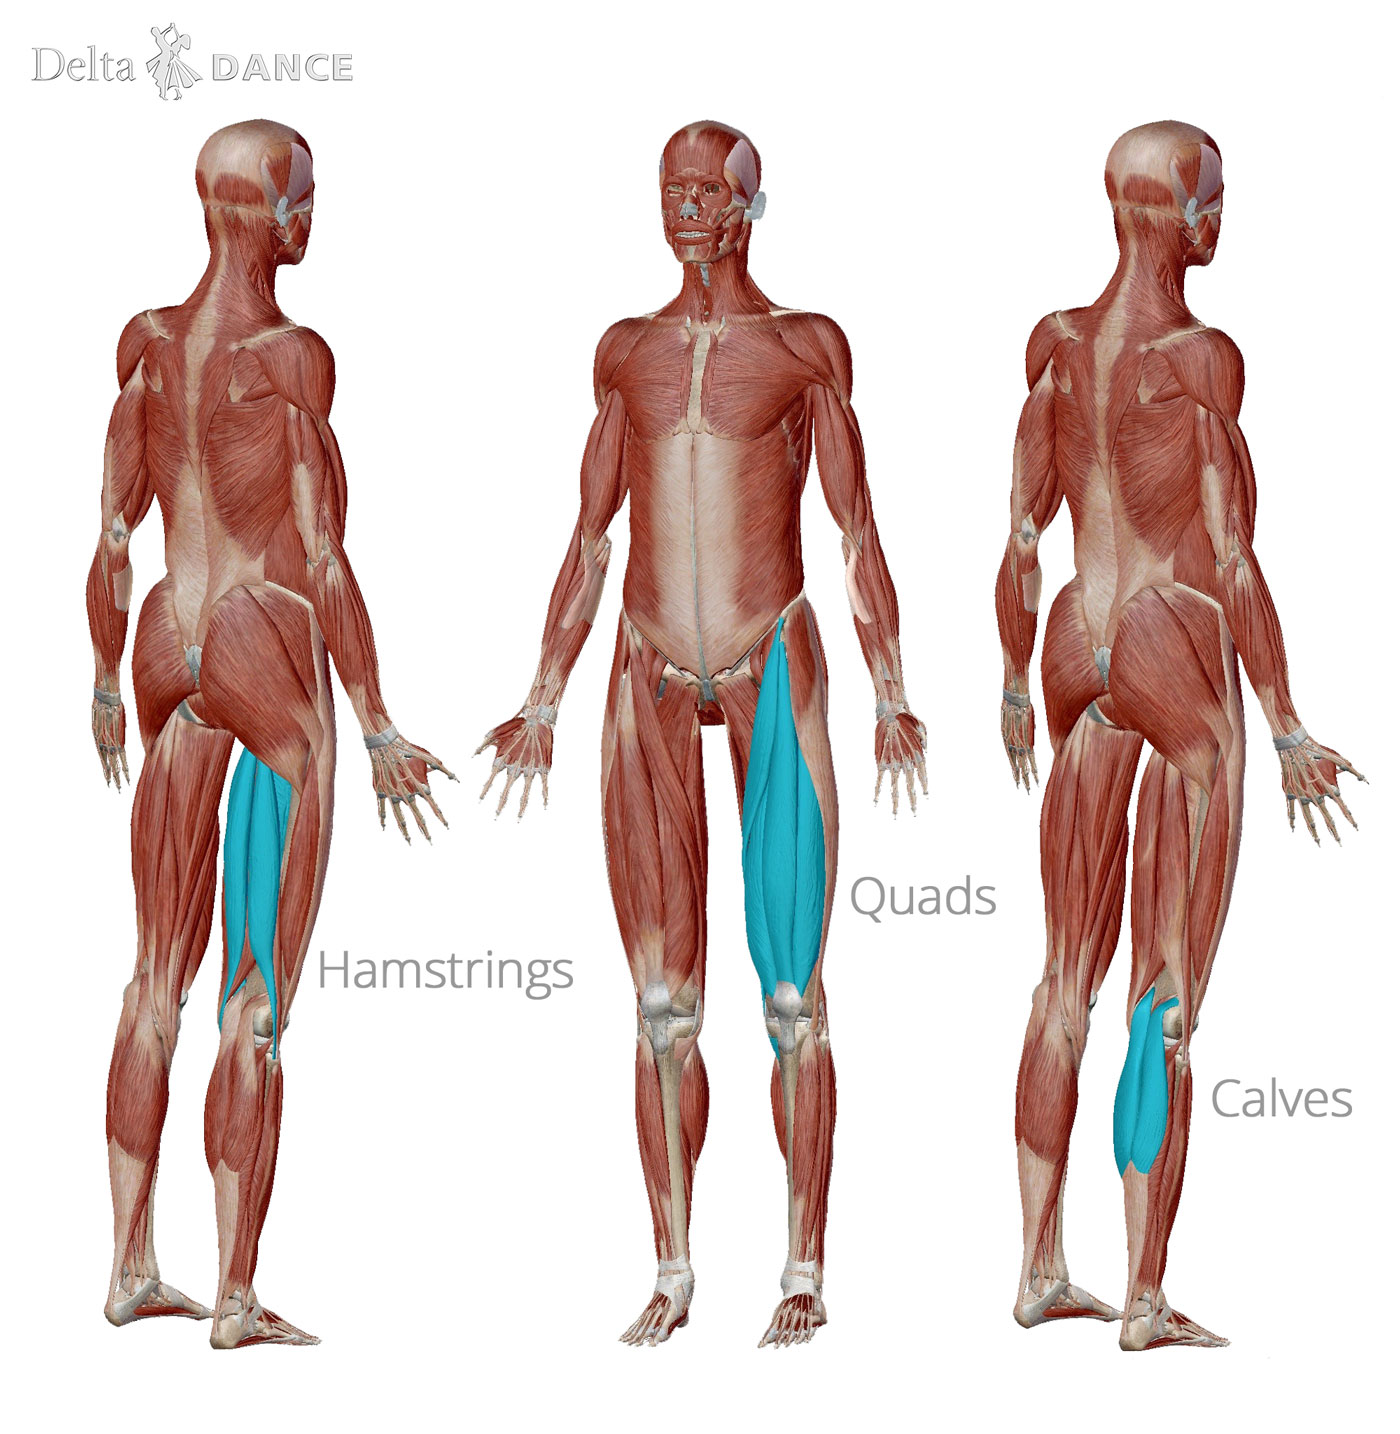 Leg muscles used for dancing